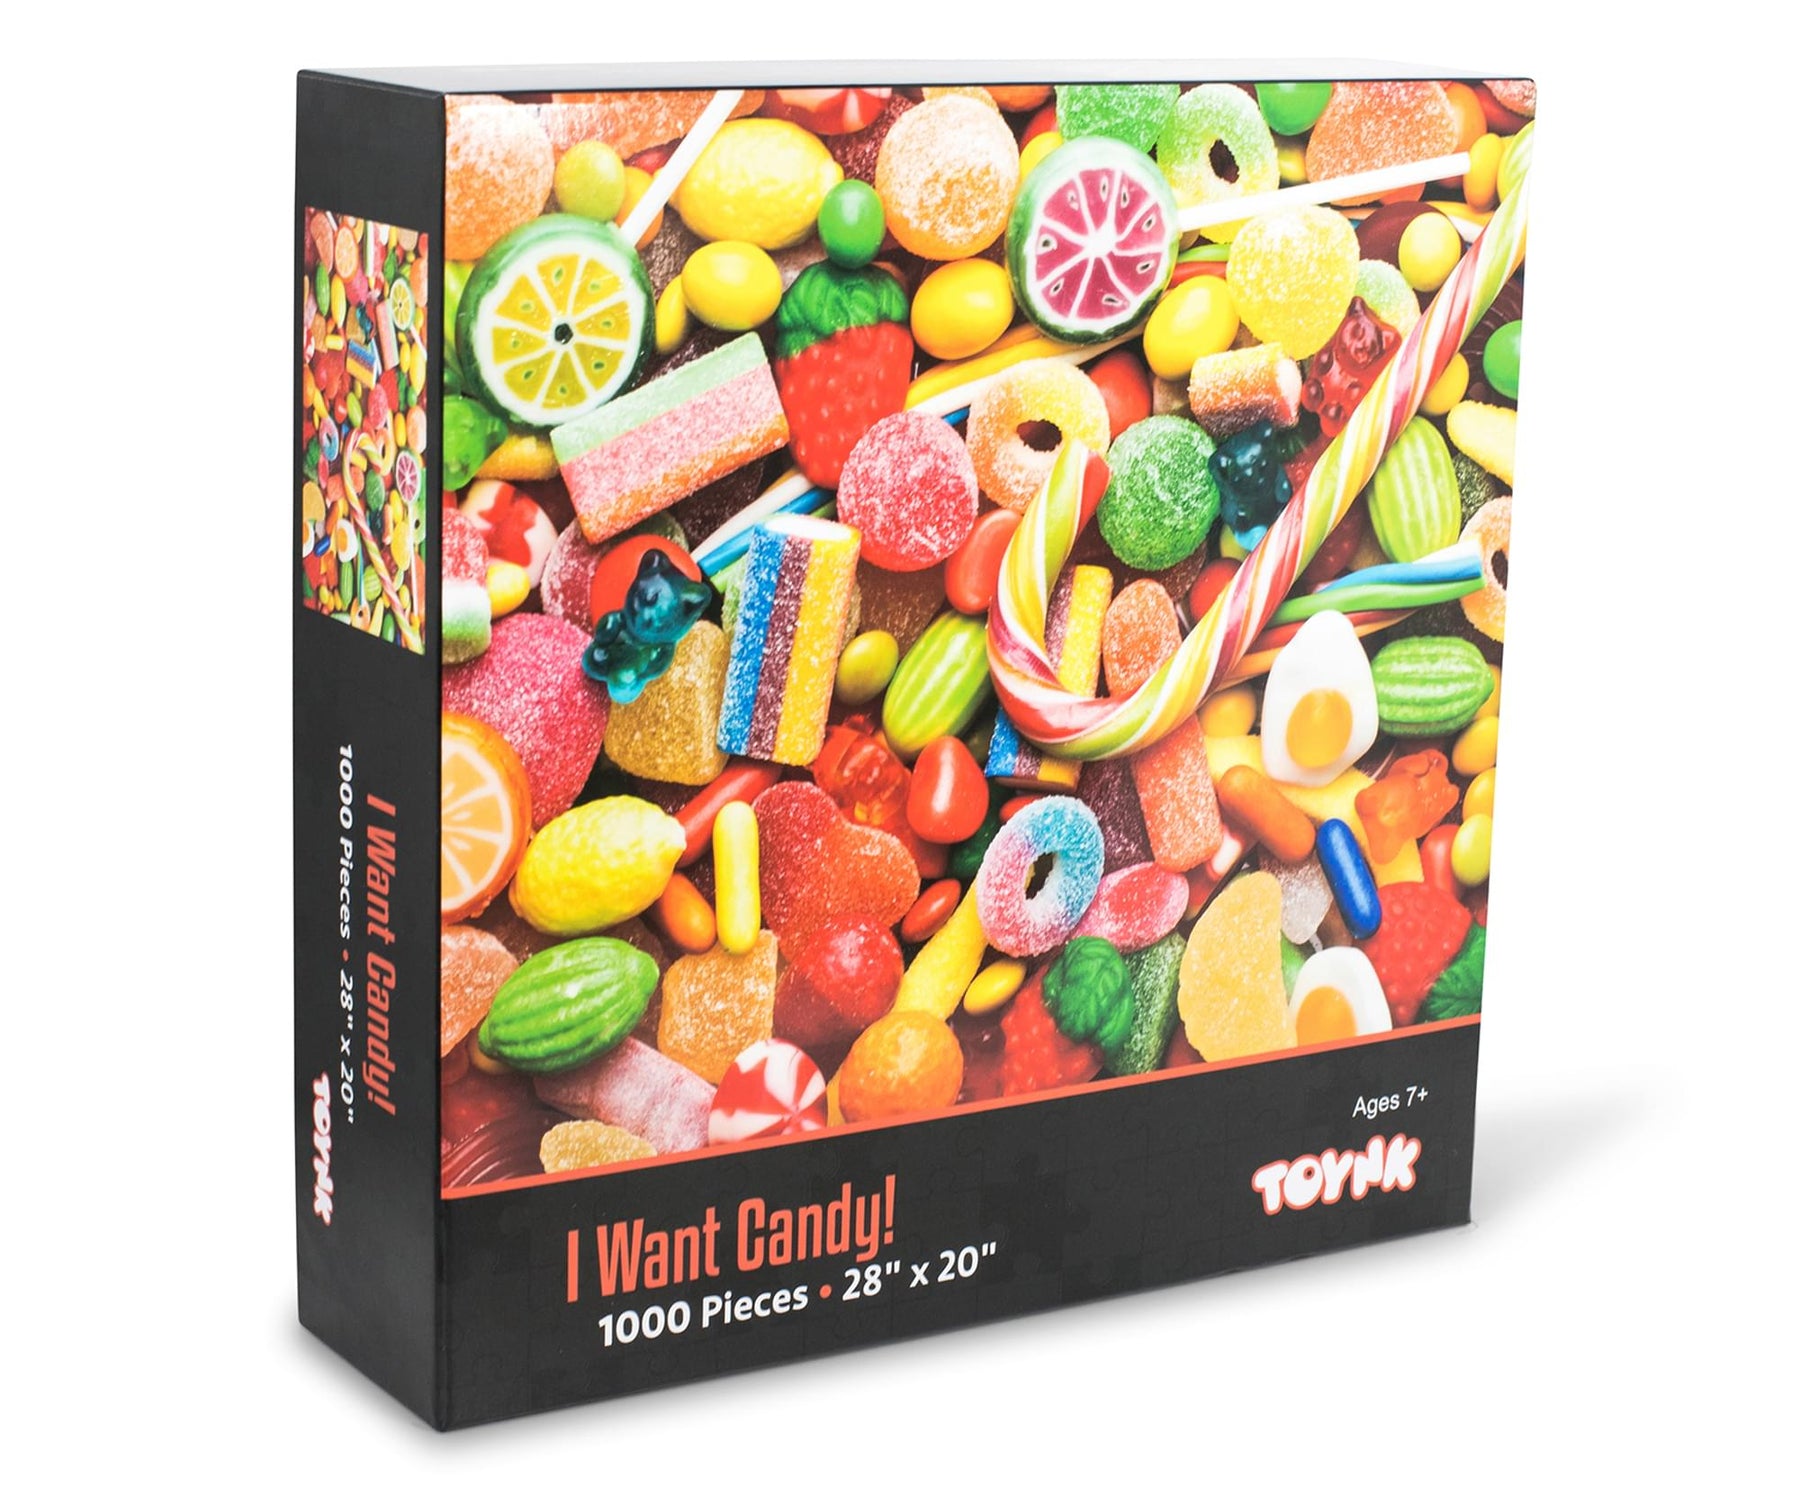 I Want Candy! Sugar Confectionery 1000 Piece Jigsaw Puzzle